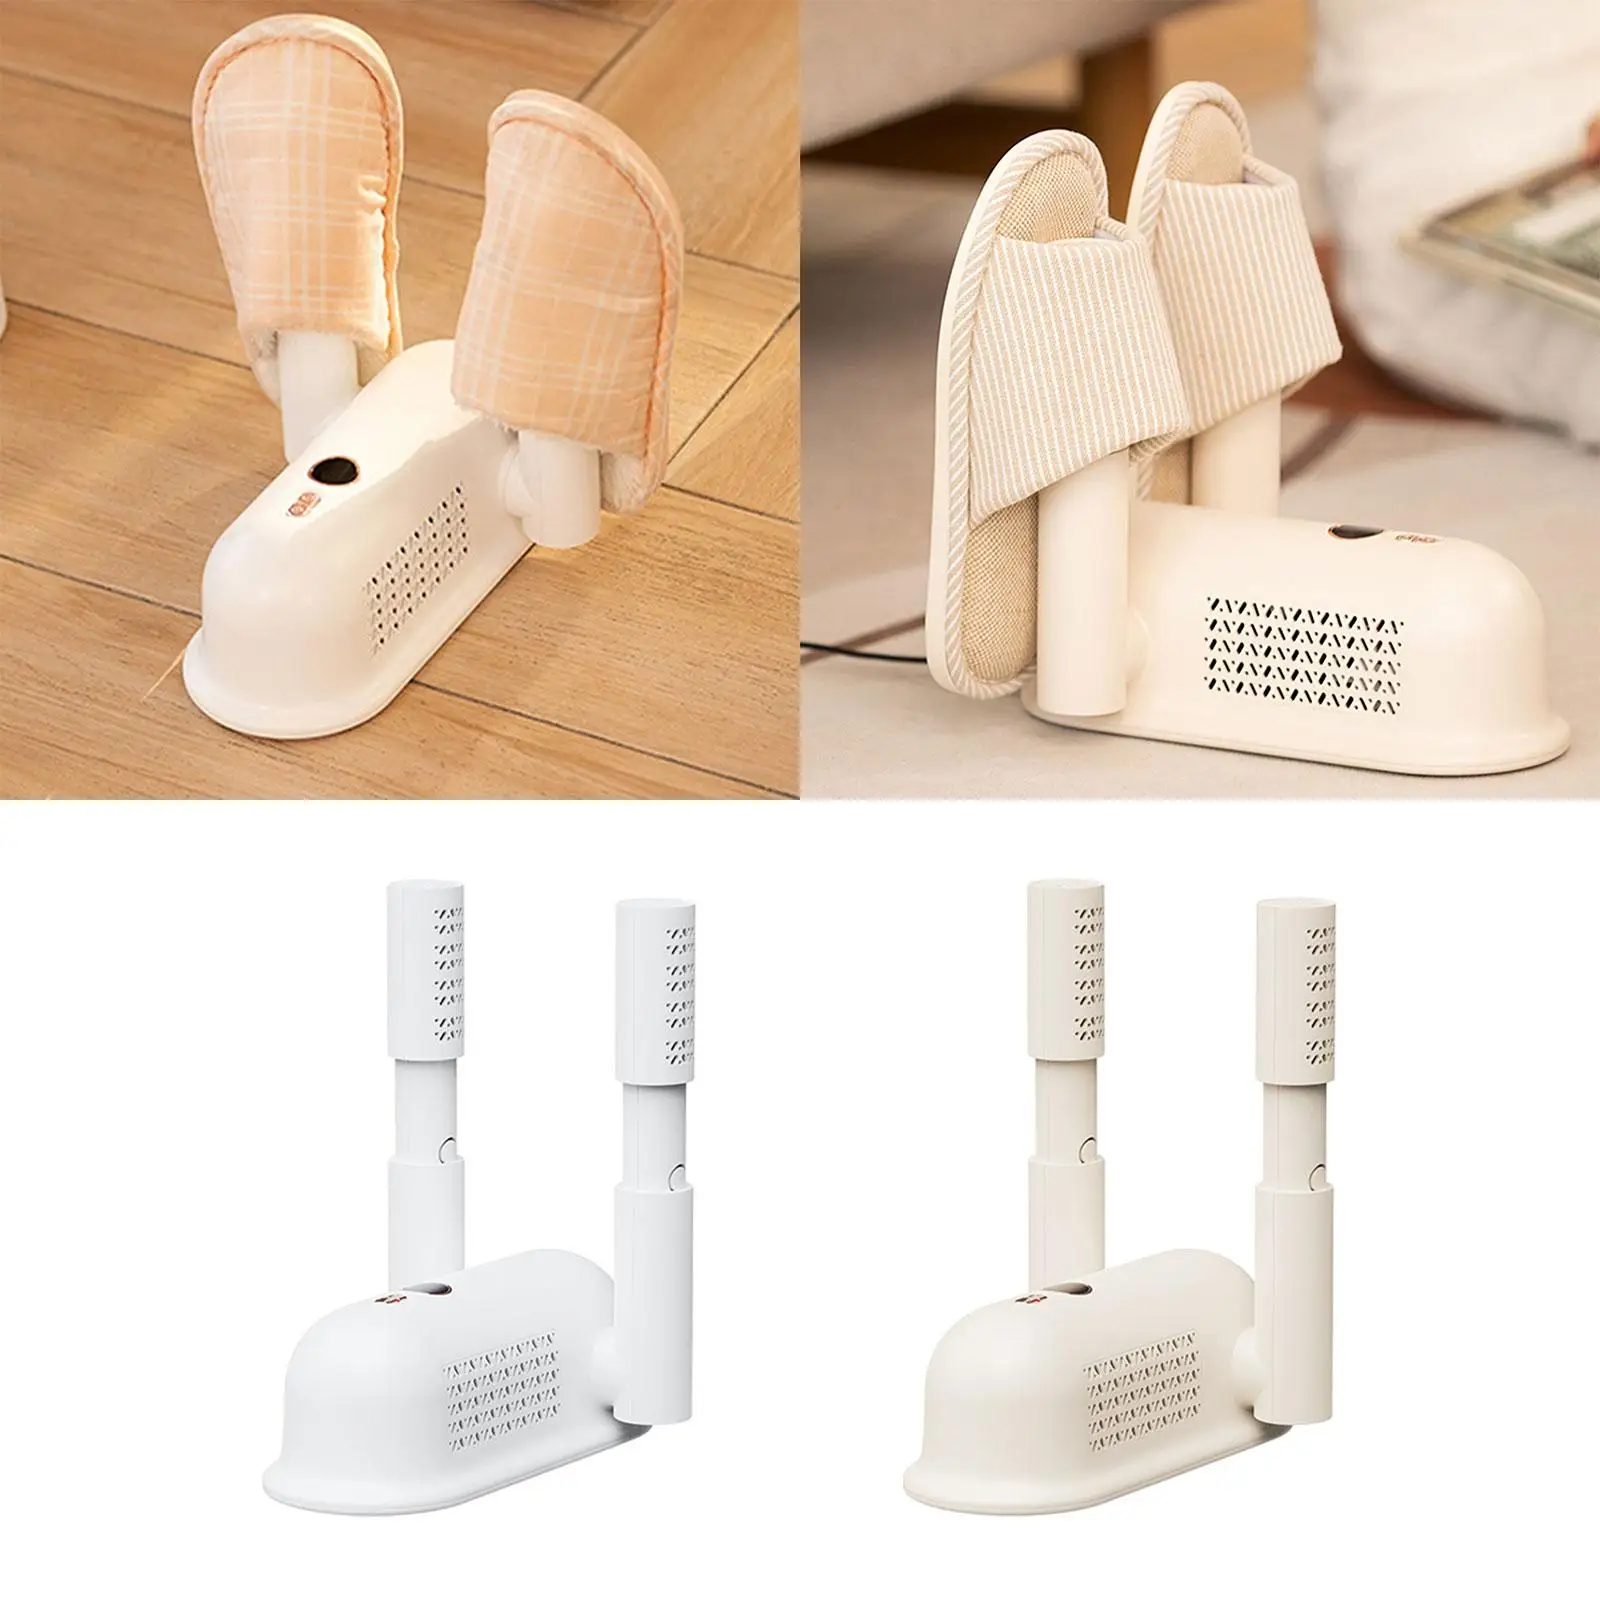 Shoes Dryer Footwears Heater Portable Multifunctional Electric Boot Warmer Boot Dryer for Socks Travel Home Boots Slippers